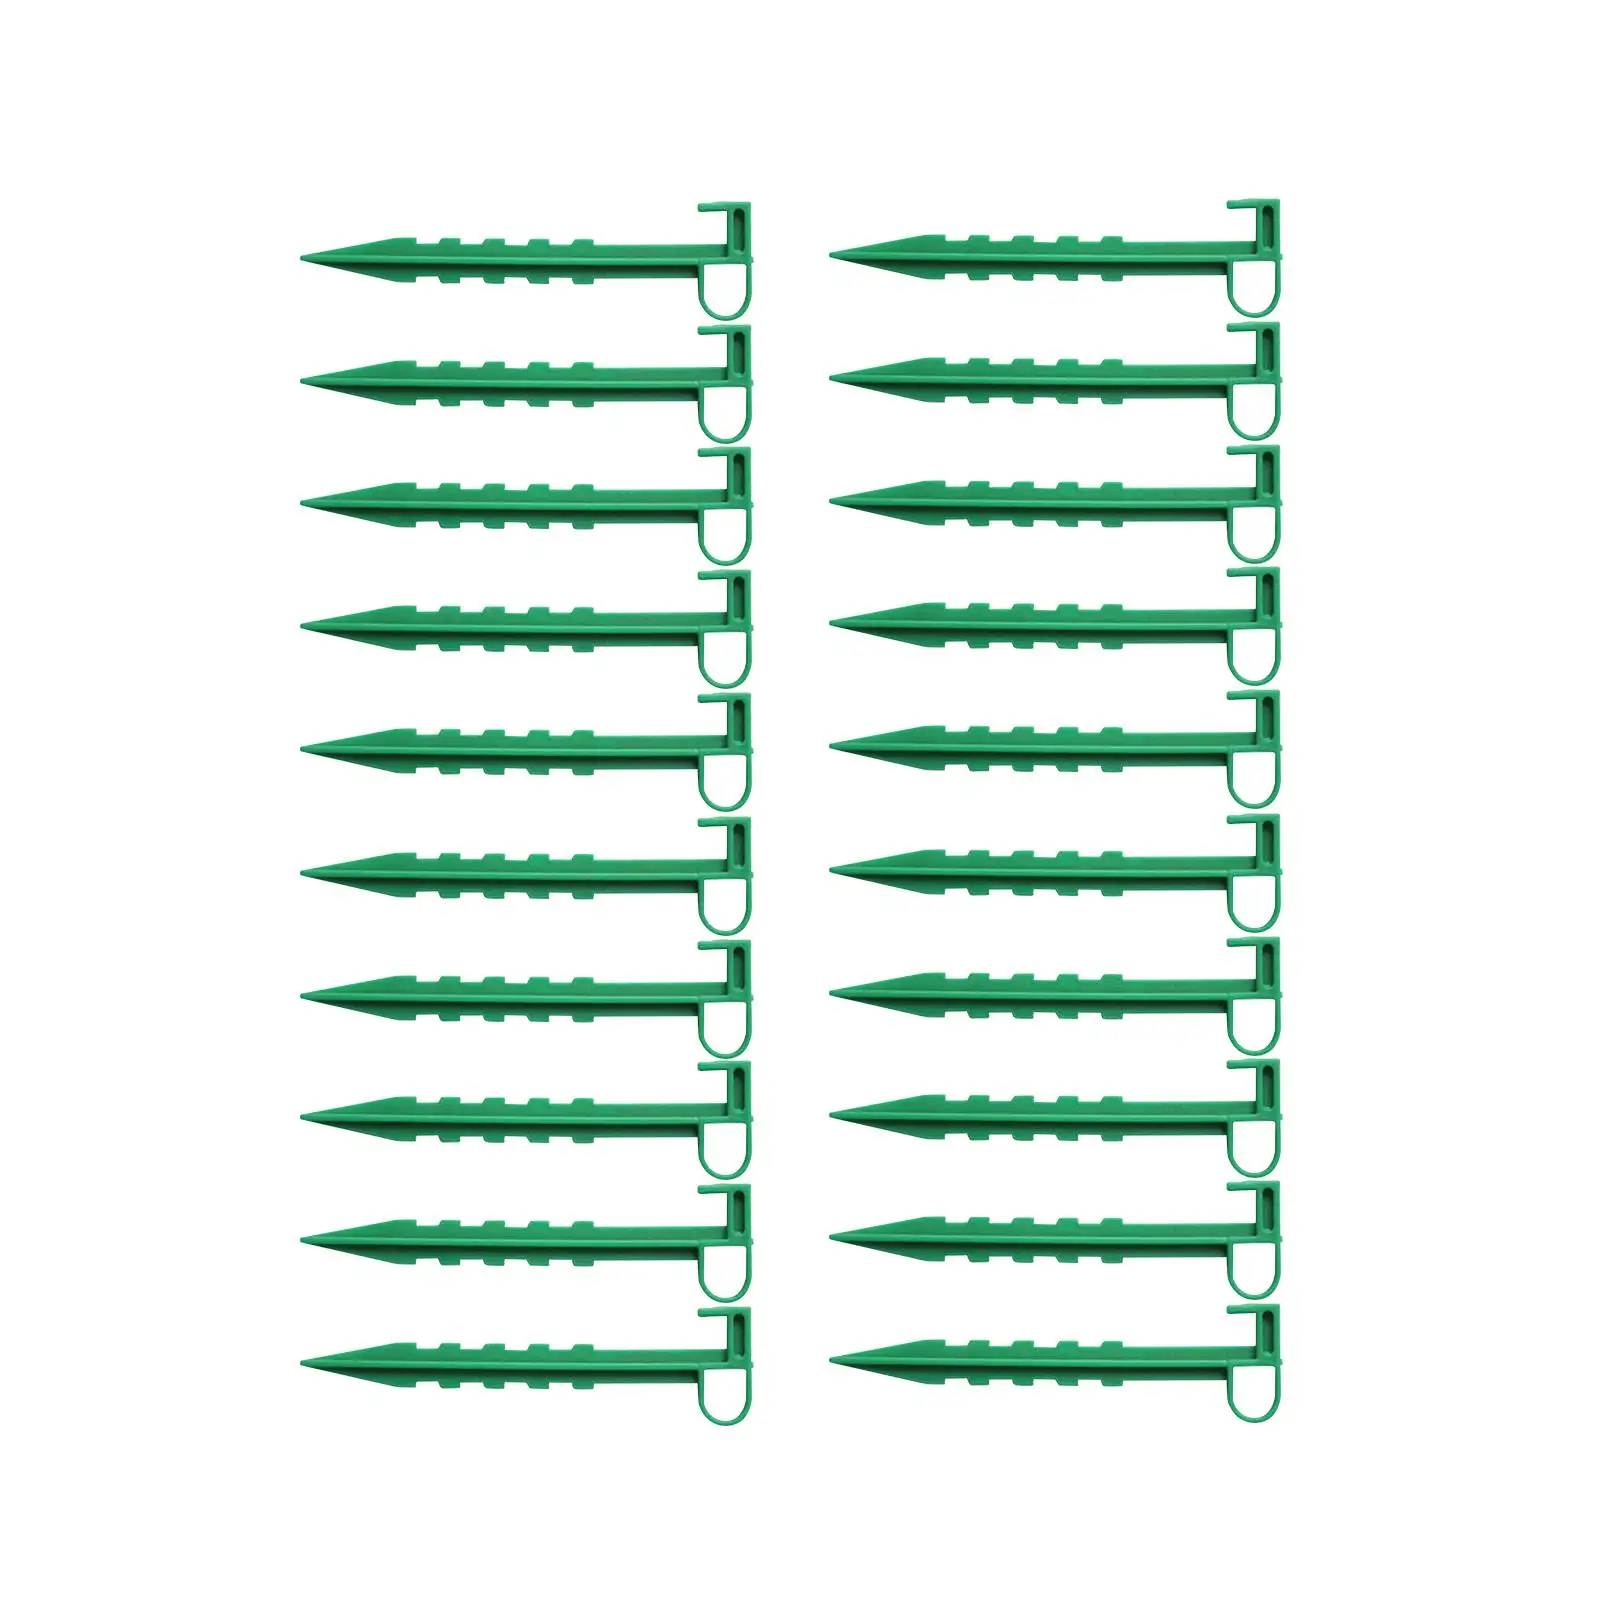 20Pcs Garden Stakes Garden Anchor Pegs for Fabric Lawn Edging Greenhouse Camping Keeping Garden Netting Down Holding Down Tents